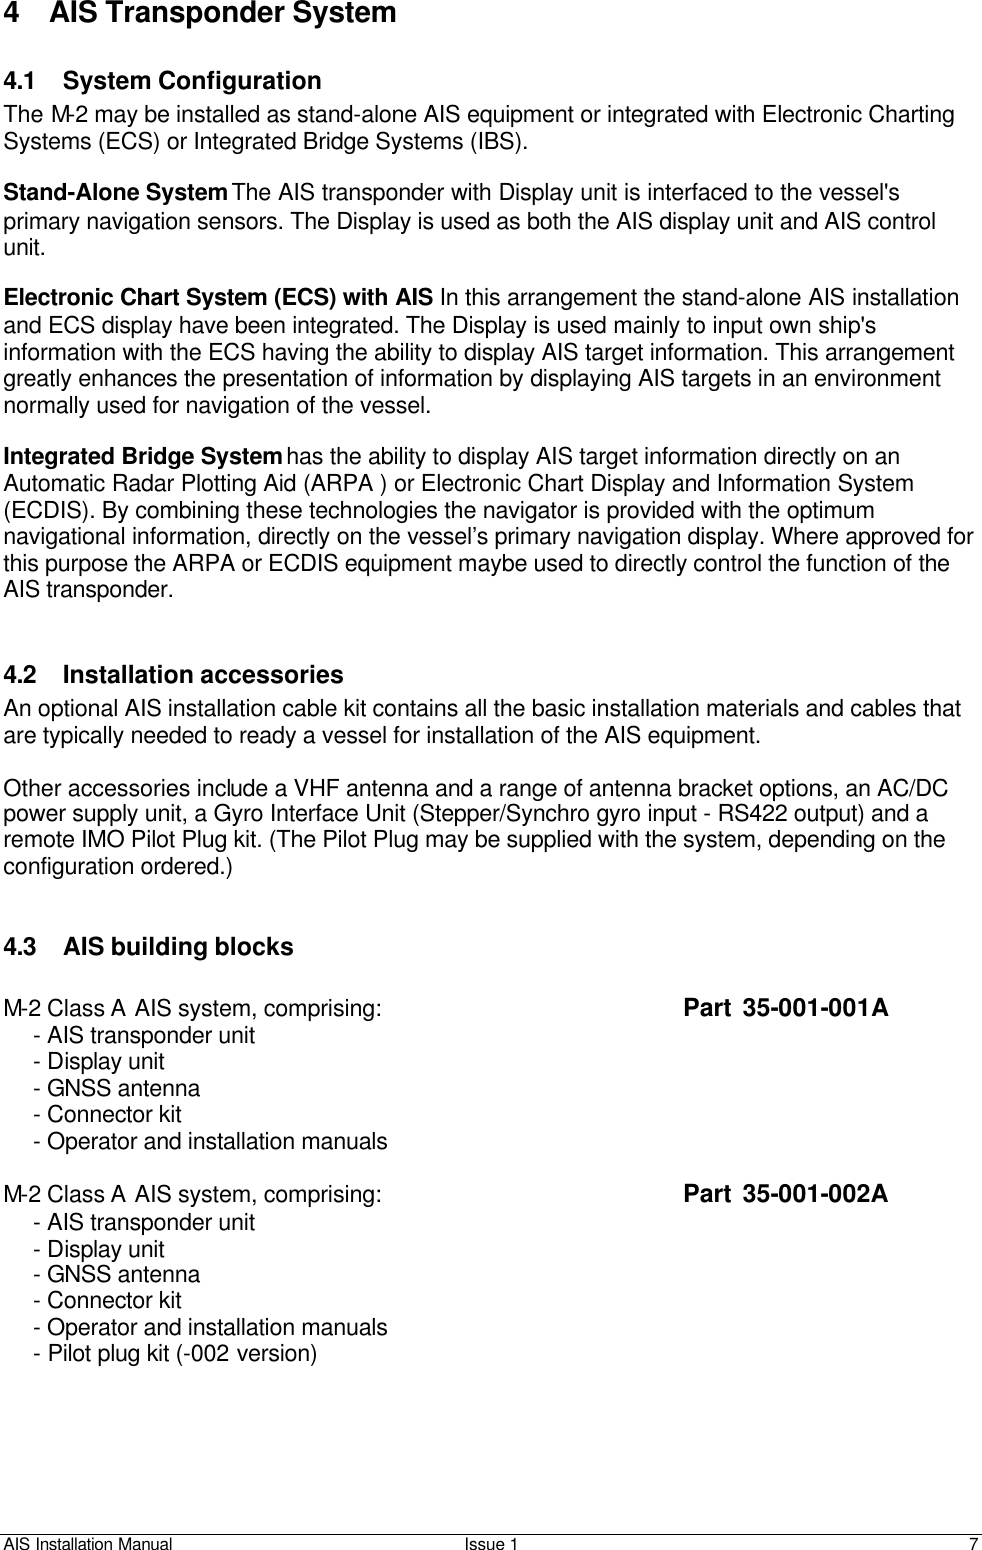 AIS Installation Manual Issue 1 7     4 AIS Transponder System  4.1 System Configuration The M-2 may be installed as stand-alone AIS equipment or integrated with Electronic Charting Systems (ECS) or Integrated Bridge Systems (IBS).   Stand-Alone System The AIS transponder with Display unit is interfaced to the vessel&apos;s primary navigation sensors. The Display is used as both the AIS display unit and AIS control unit.   Electronic Chart System (ECS) with AIS In this arrangement the stand-alone AIS installation and ECS display have been integrated. The Display is used mainly to input own ship&apos;s information with the ECS having the ability to display AIS target information. This arrangement greatly enhances the presentation of information by displaying AIS targets in an environment normally used for navigation of the vessel.   Integrated Bridge System has the ability to display AIS target information directly on an Automatic Radar Plotting Aid (ARPA ) or Electronic Chart Display and Information System (ECDIS). By combining these technologies the navigator is provided with the optimum navigational information, directly on the vessel’s primary navigation display. Where approved for this purpose the ARPA or ECDIS equipment maybe used to directly control the function of the AIS transponder.    4.2 Installation accessories An optional AIS installation cable kit contains all the basic installation materials and cables that are typically needed to ready a vessel for installation of the AIS equipment.  Other accessories include a VHF antenna and a range of antenna bracket options, an AC/DC power supply unit, a Gyro Interface Unit (Stepper/Synchro gyro input - RS422 output) and a remote IMO Pilot Plug kit. (The Pilot Plug may be supplied with the system, depending on the configuration ordered.)   4.3 AIS building blocks    M-2 Class A AIS system, comprising:            Part  35-001-001A  - AIS transponder unit  - Display unit   - GNSS antenna   - Connector kit  - Operator and installation manuals  M-2 Class A AIS system, comprising:            Part  35-001-002A  - AIS transponder unit  - Display unit   - GNSS antenna   - Connector kit  - Operator and installation manuals  - Pilot plug kit (-002 version) 